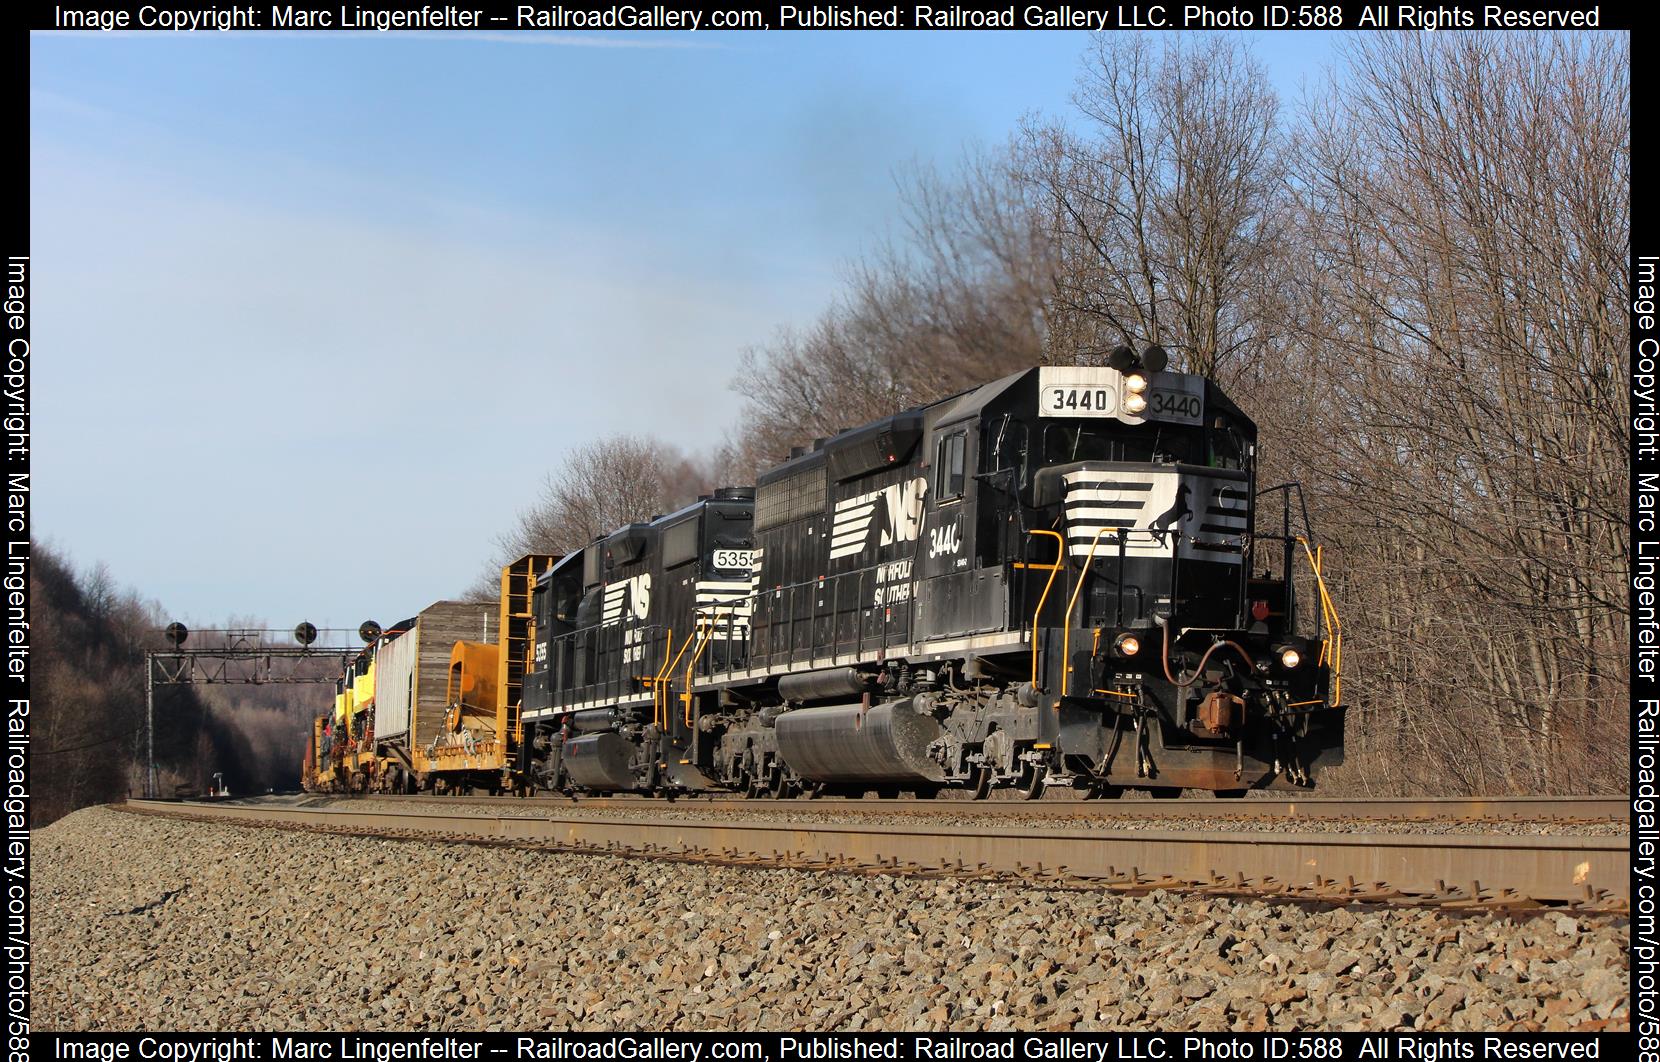 NS 3440 is a class EMD SD40-2R and  is pictured in Lilly, Pennsylvania, USA.  This was taken along the NS Pittsburgh Line on the Norfolk Southern. Photo Copyright: Marc Lingenfelter uploaded to Railroad Gallery on 01/17/2023. This photograph of NS 3440 was taken on Sunday, April 20, 2014. All Rights Reserved. 